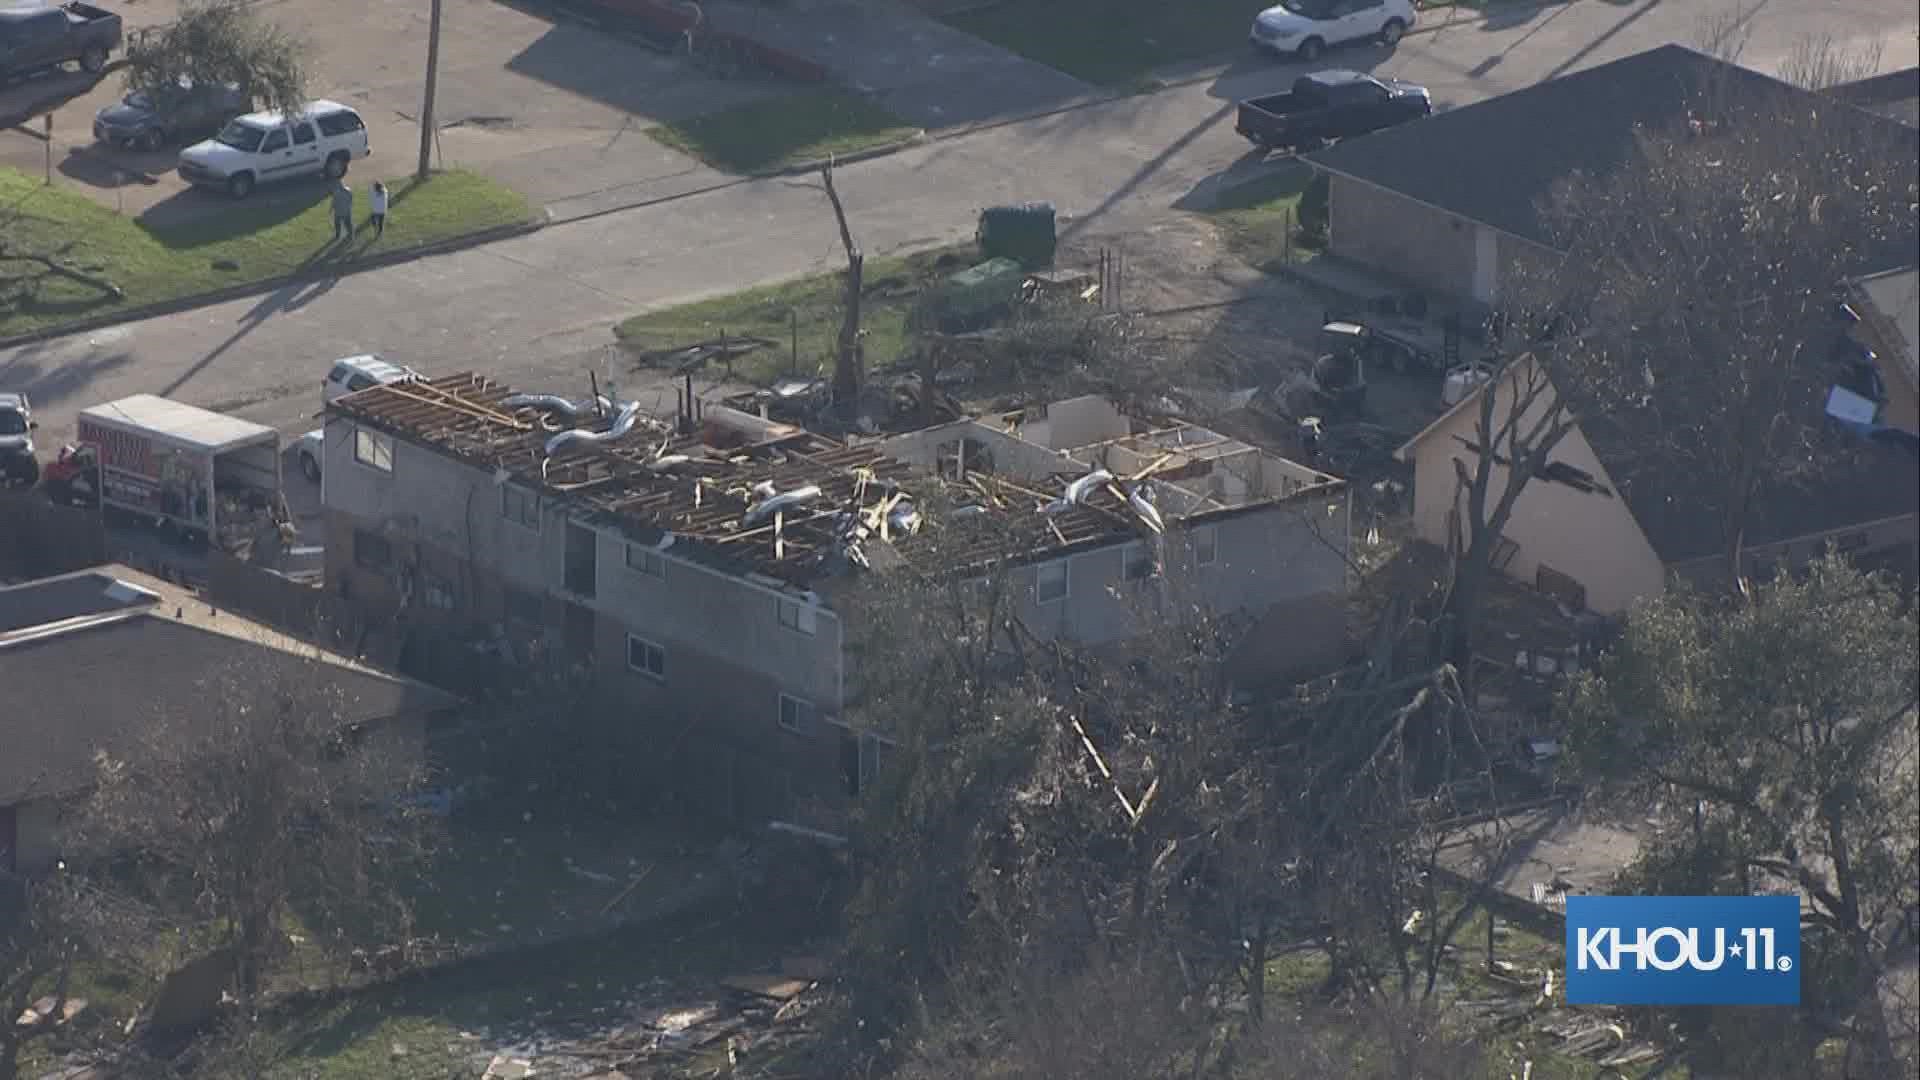 On Jan. 24, multiple homes and buildings were destroyed across southeast Houston during an EF3 tornado. This is aerial video from Air 11.